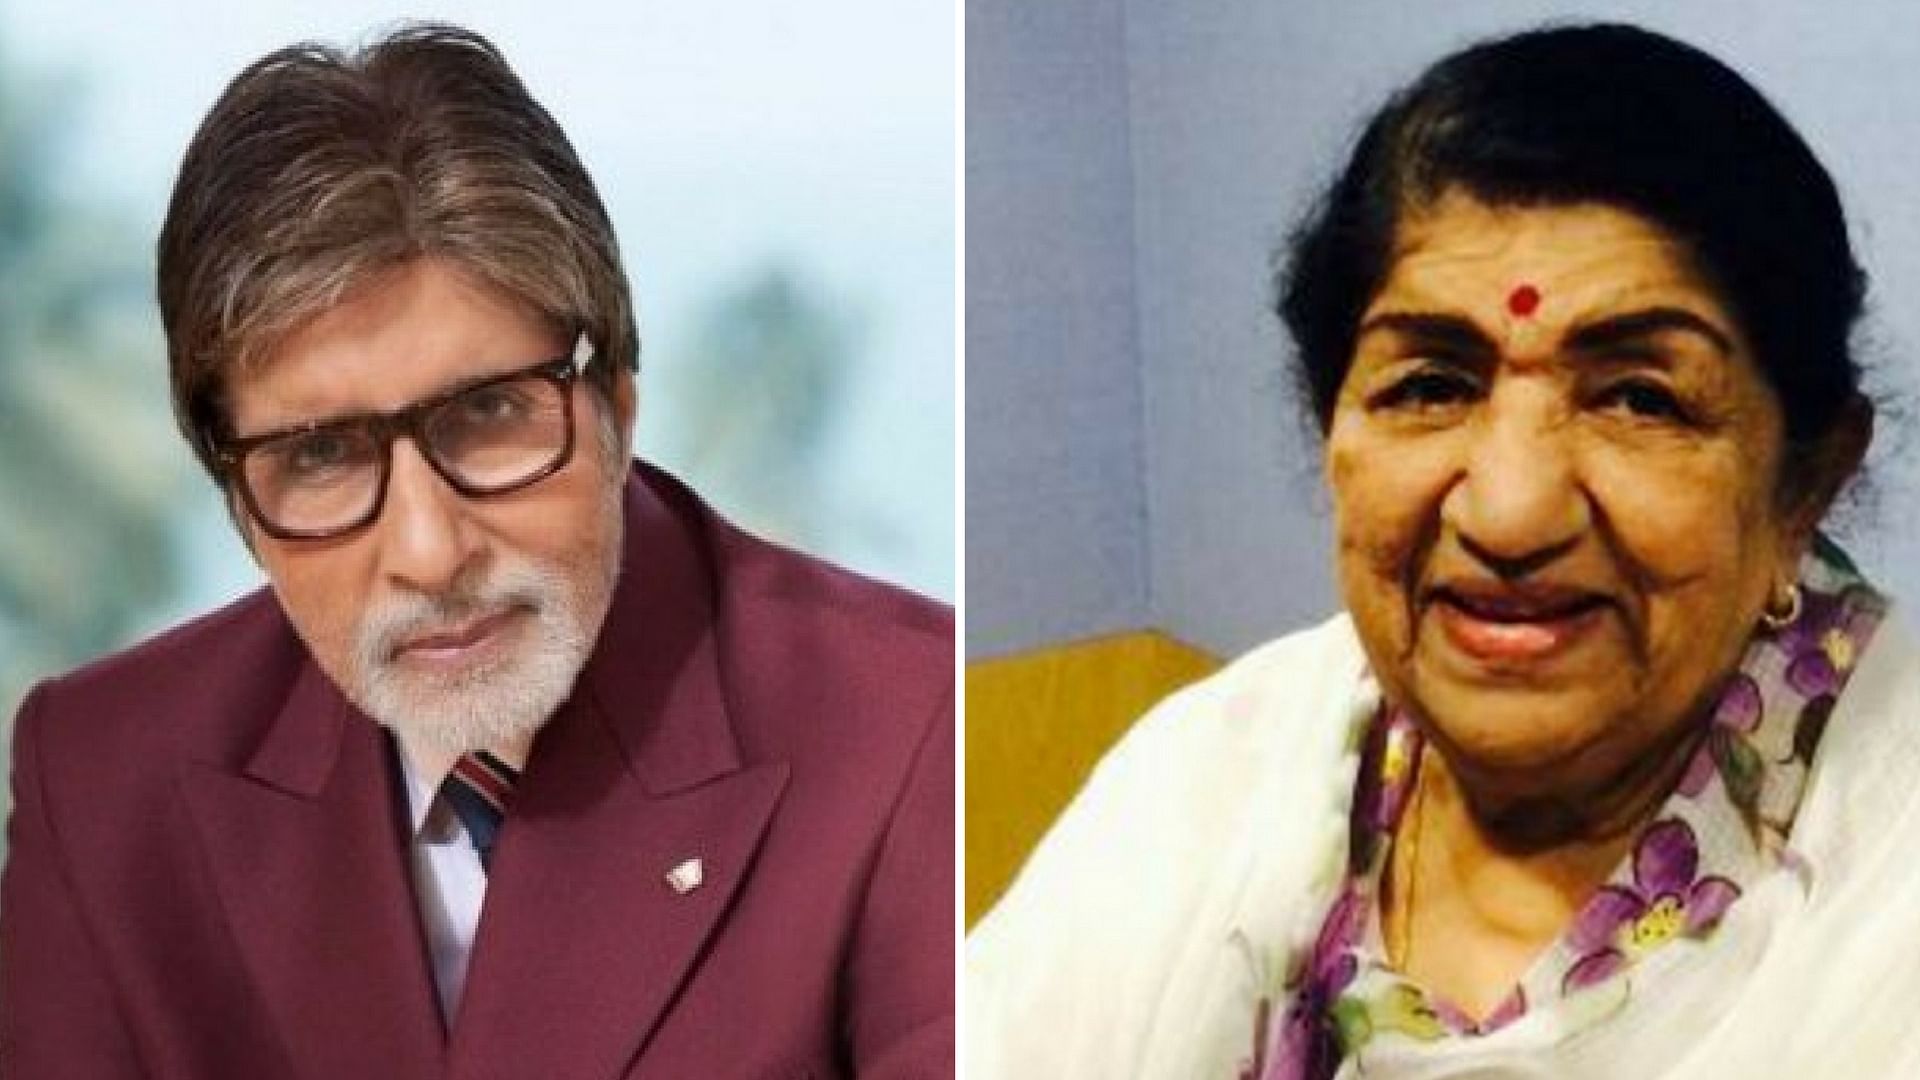 Amitabh Bachchan and Lata Mangeshkar are among those who have been invited for the GST launch event.